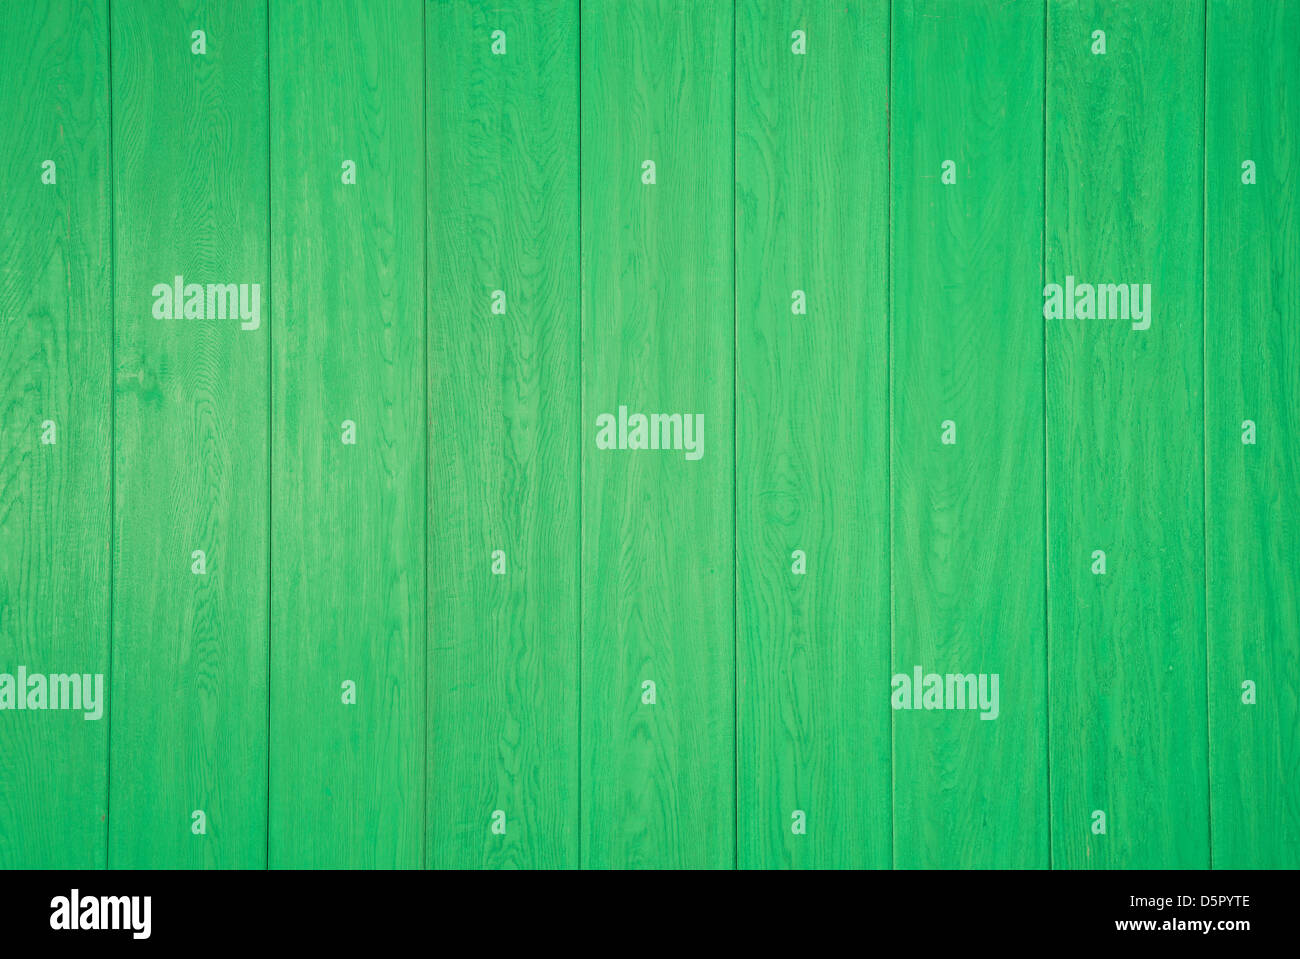 Wooden wall painted bright green Stock Photo